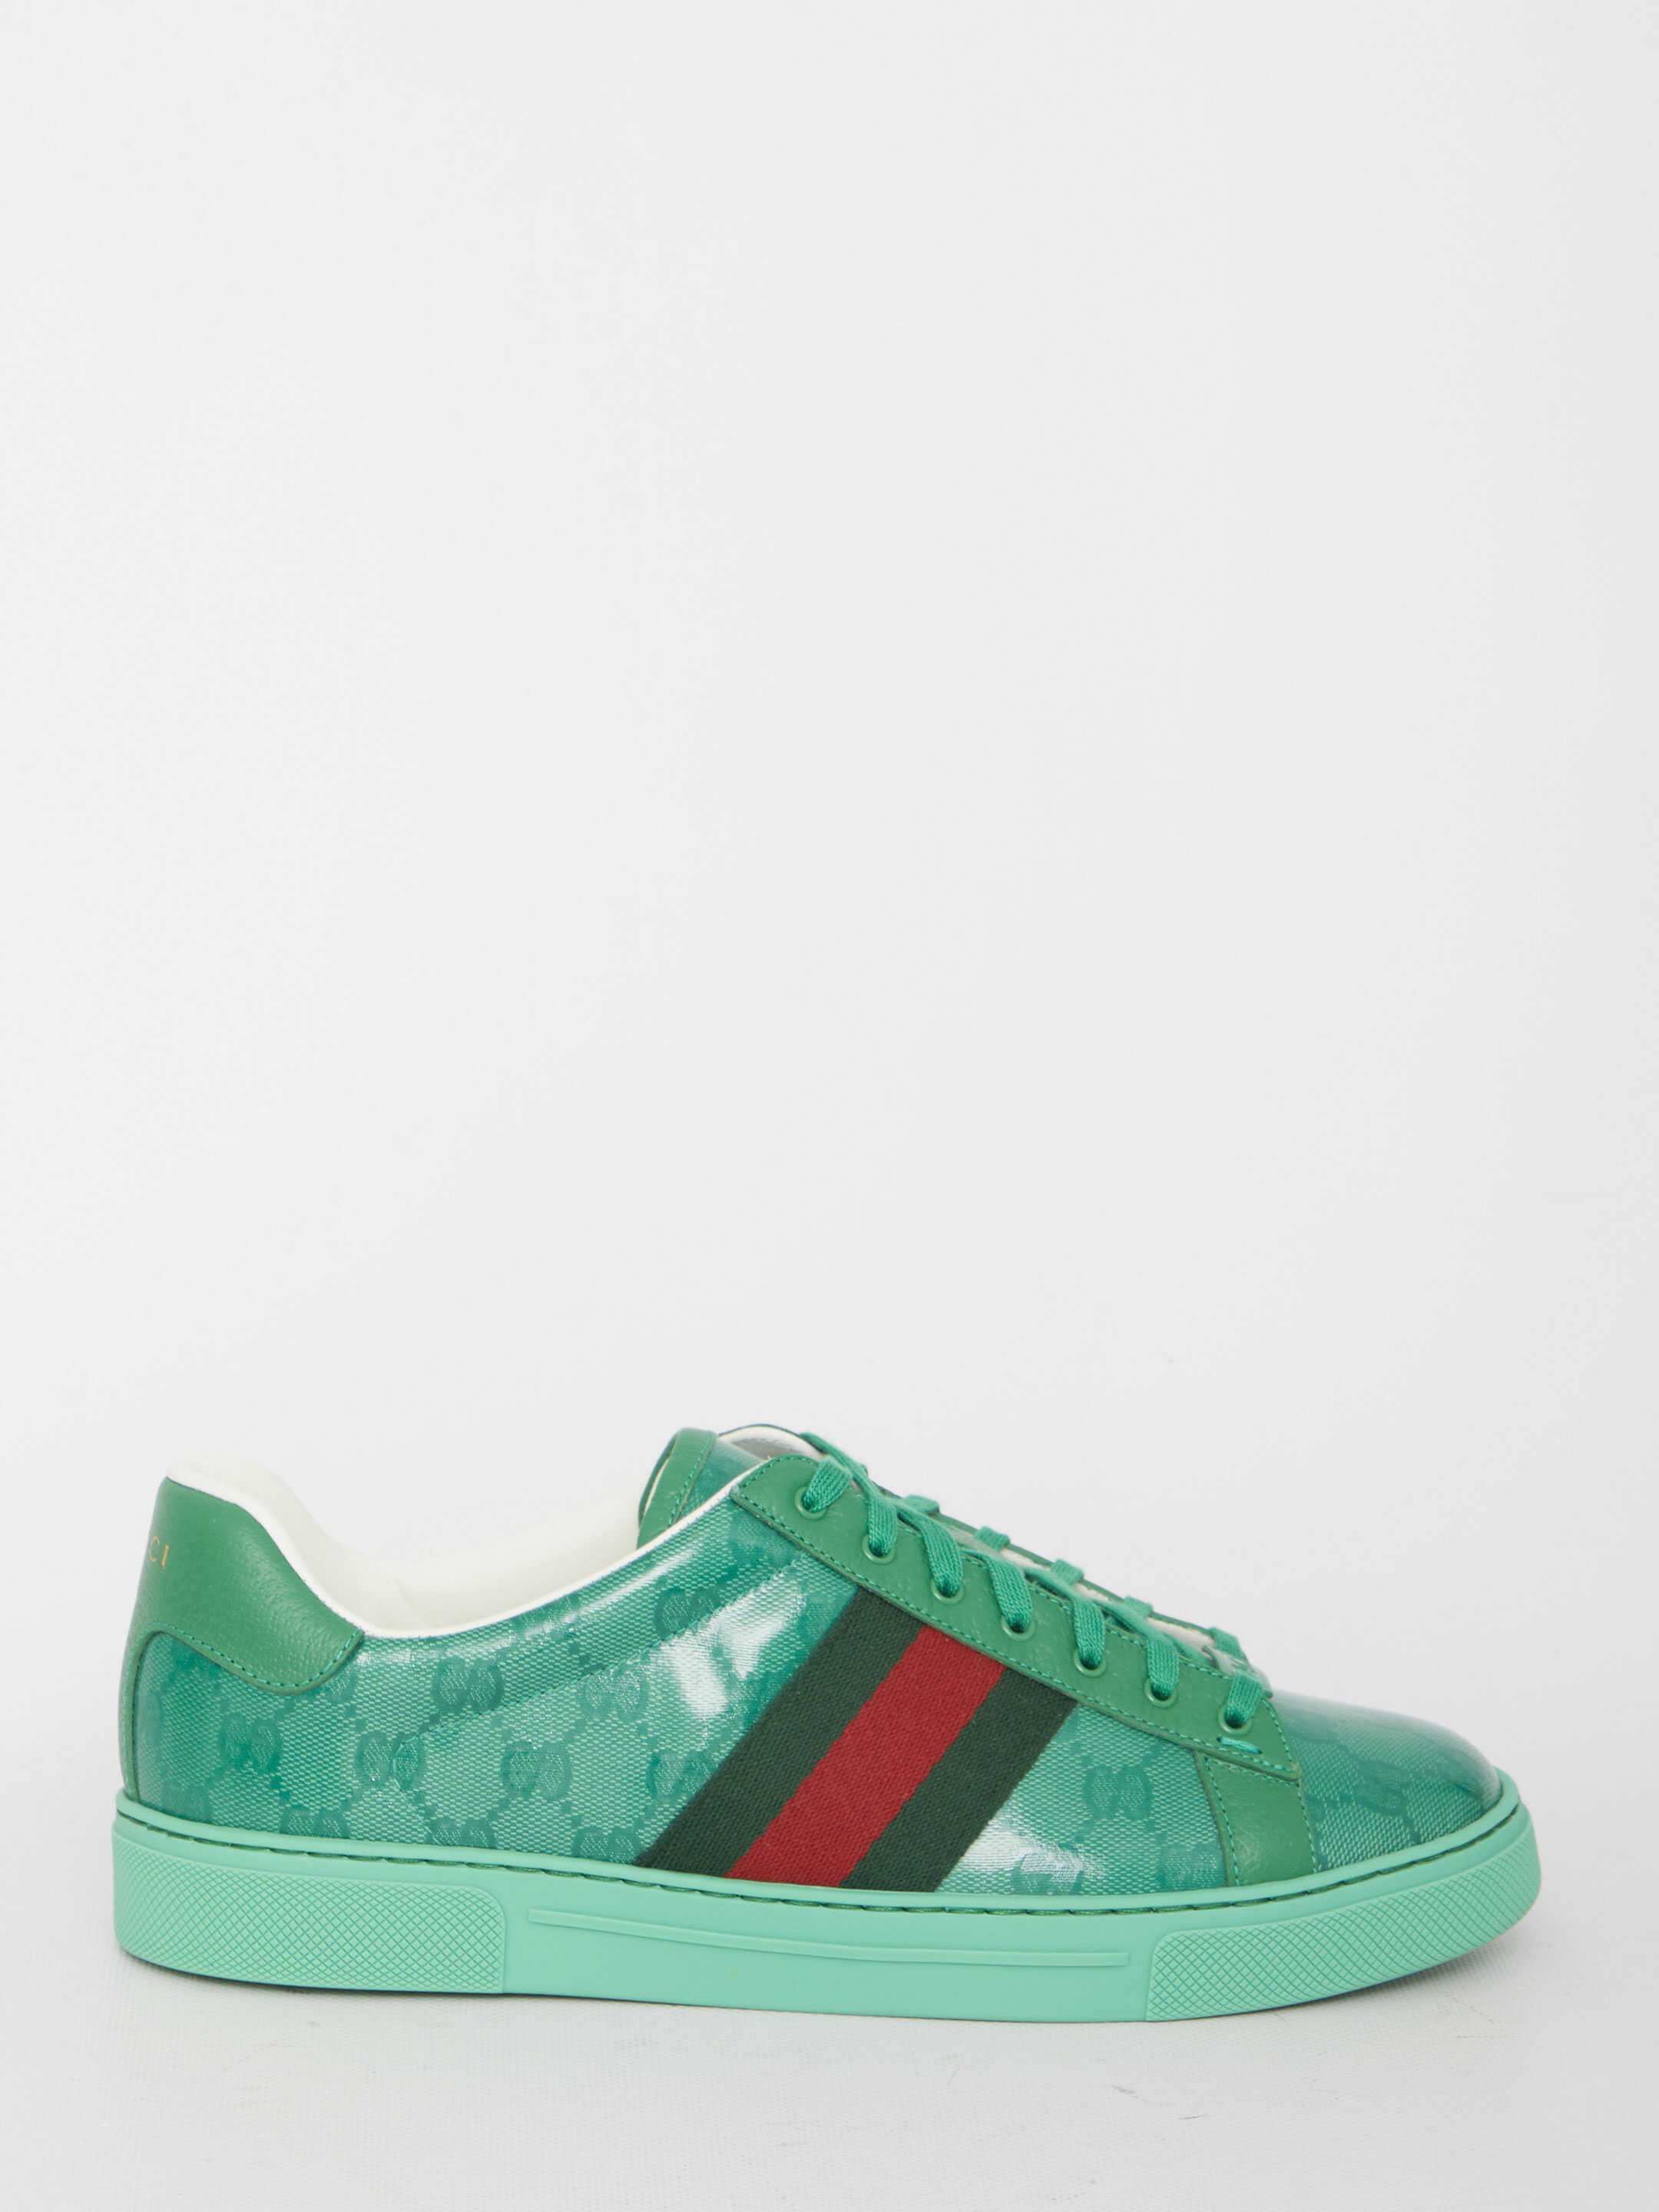 Gucci Ace Sneakers GREEN